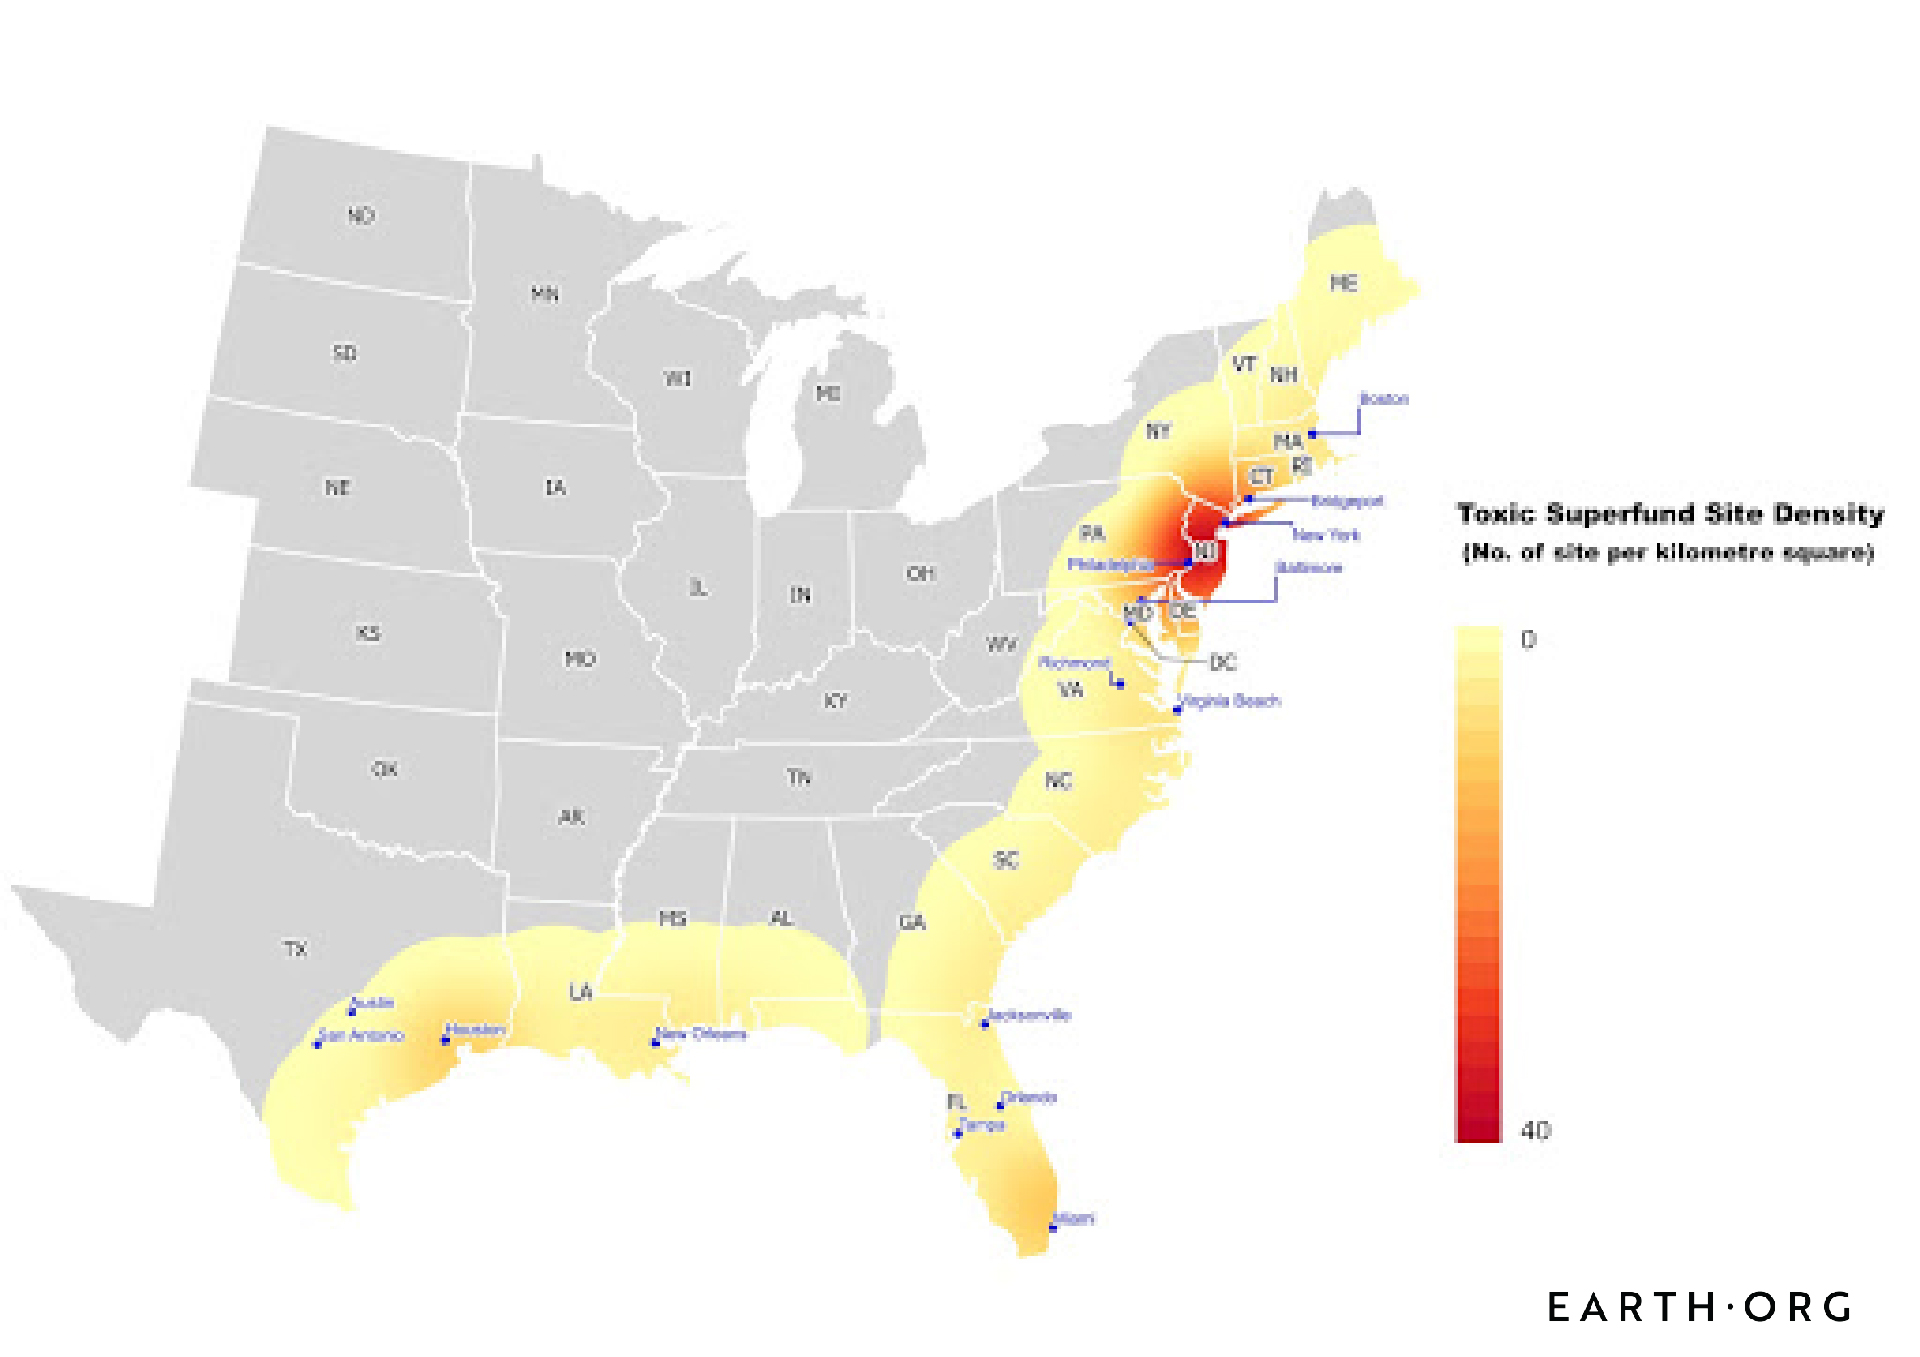 Toxic superfund site density concentration locations USA